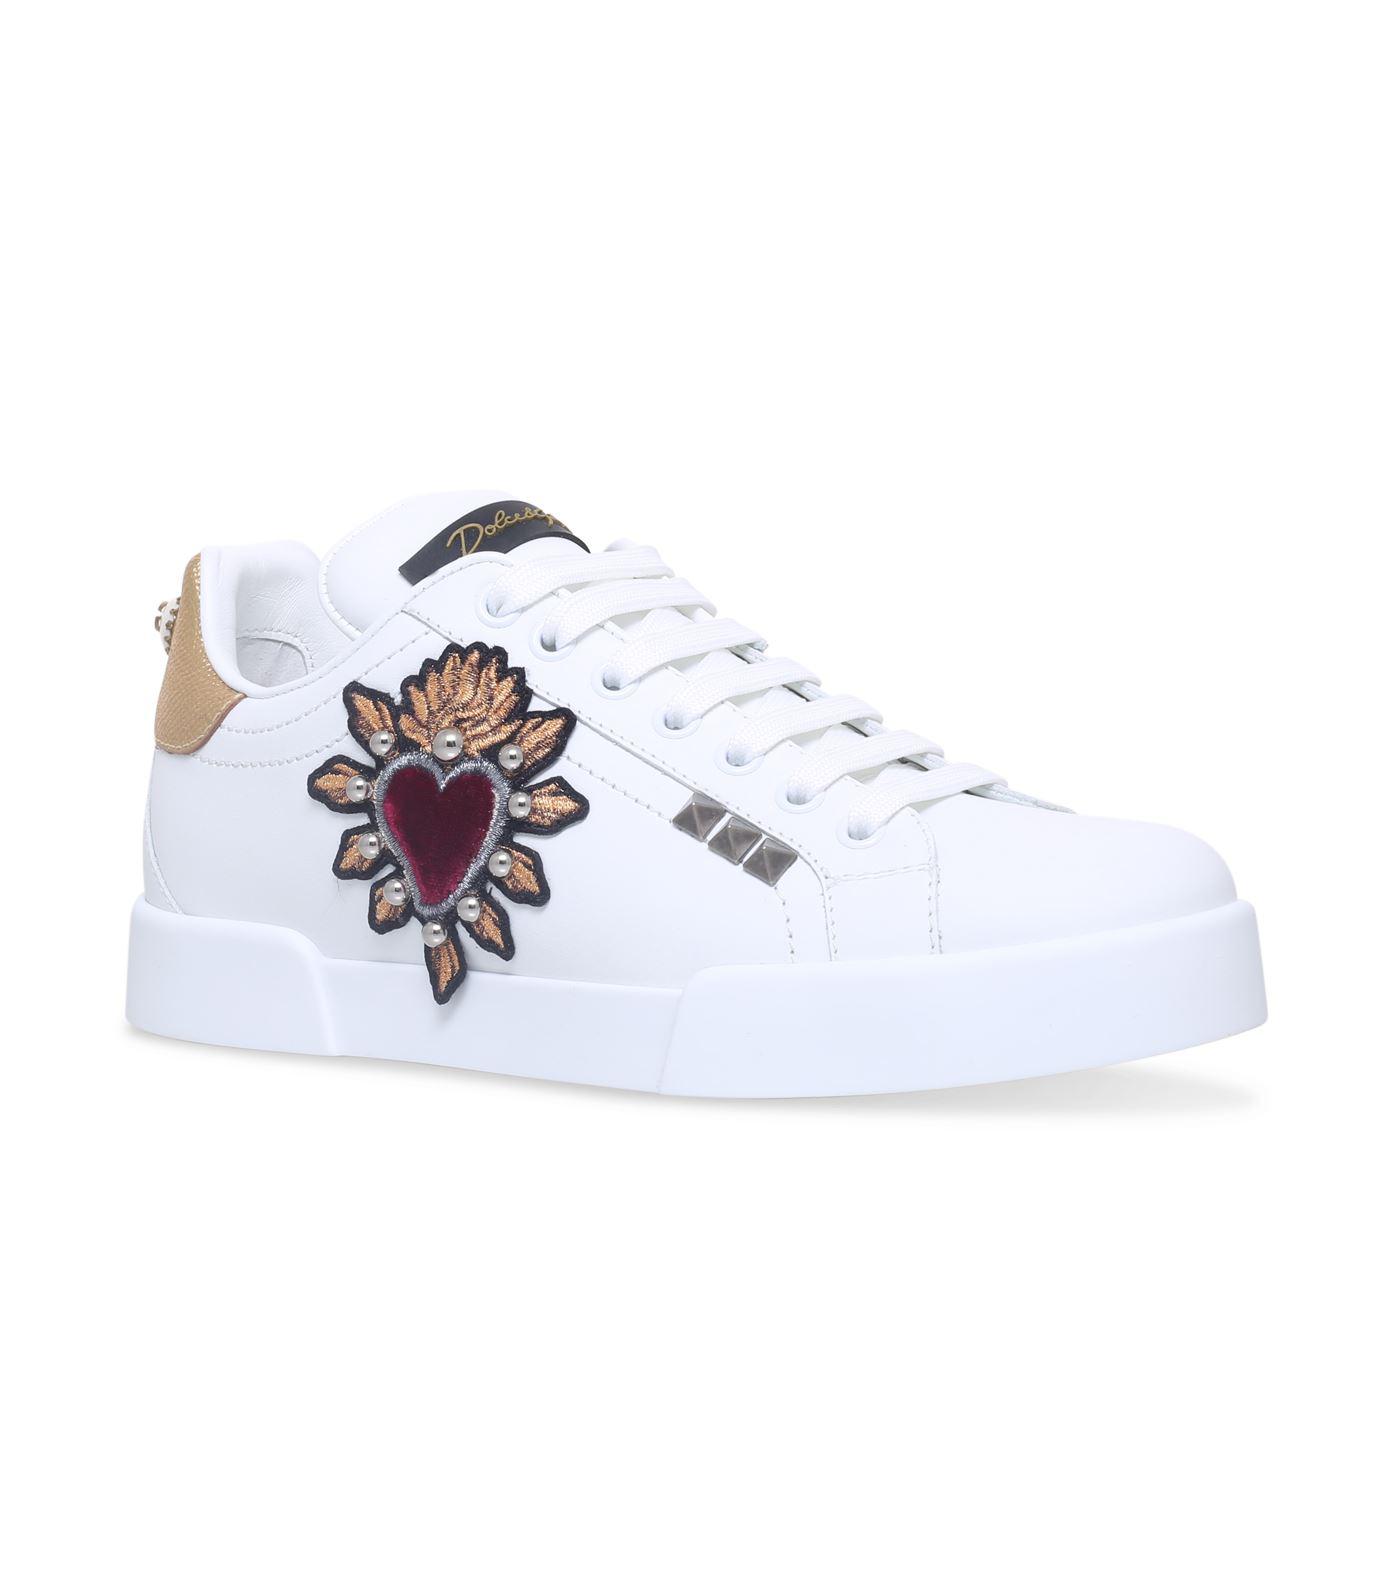 Dolce & Gabbana Leather Heart Patch Sneakers in Gold (Metallic) | Lyst